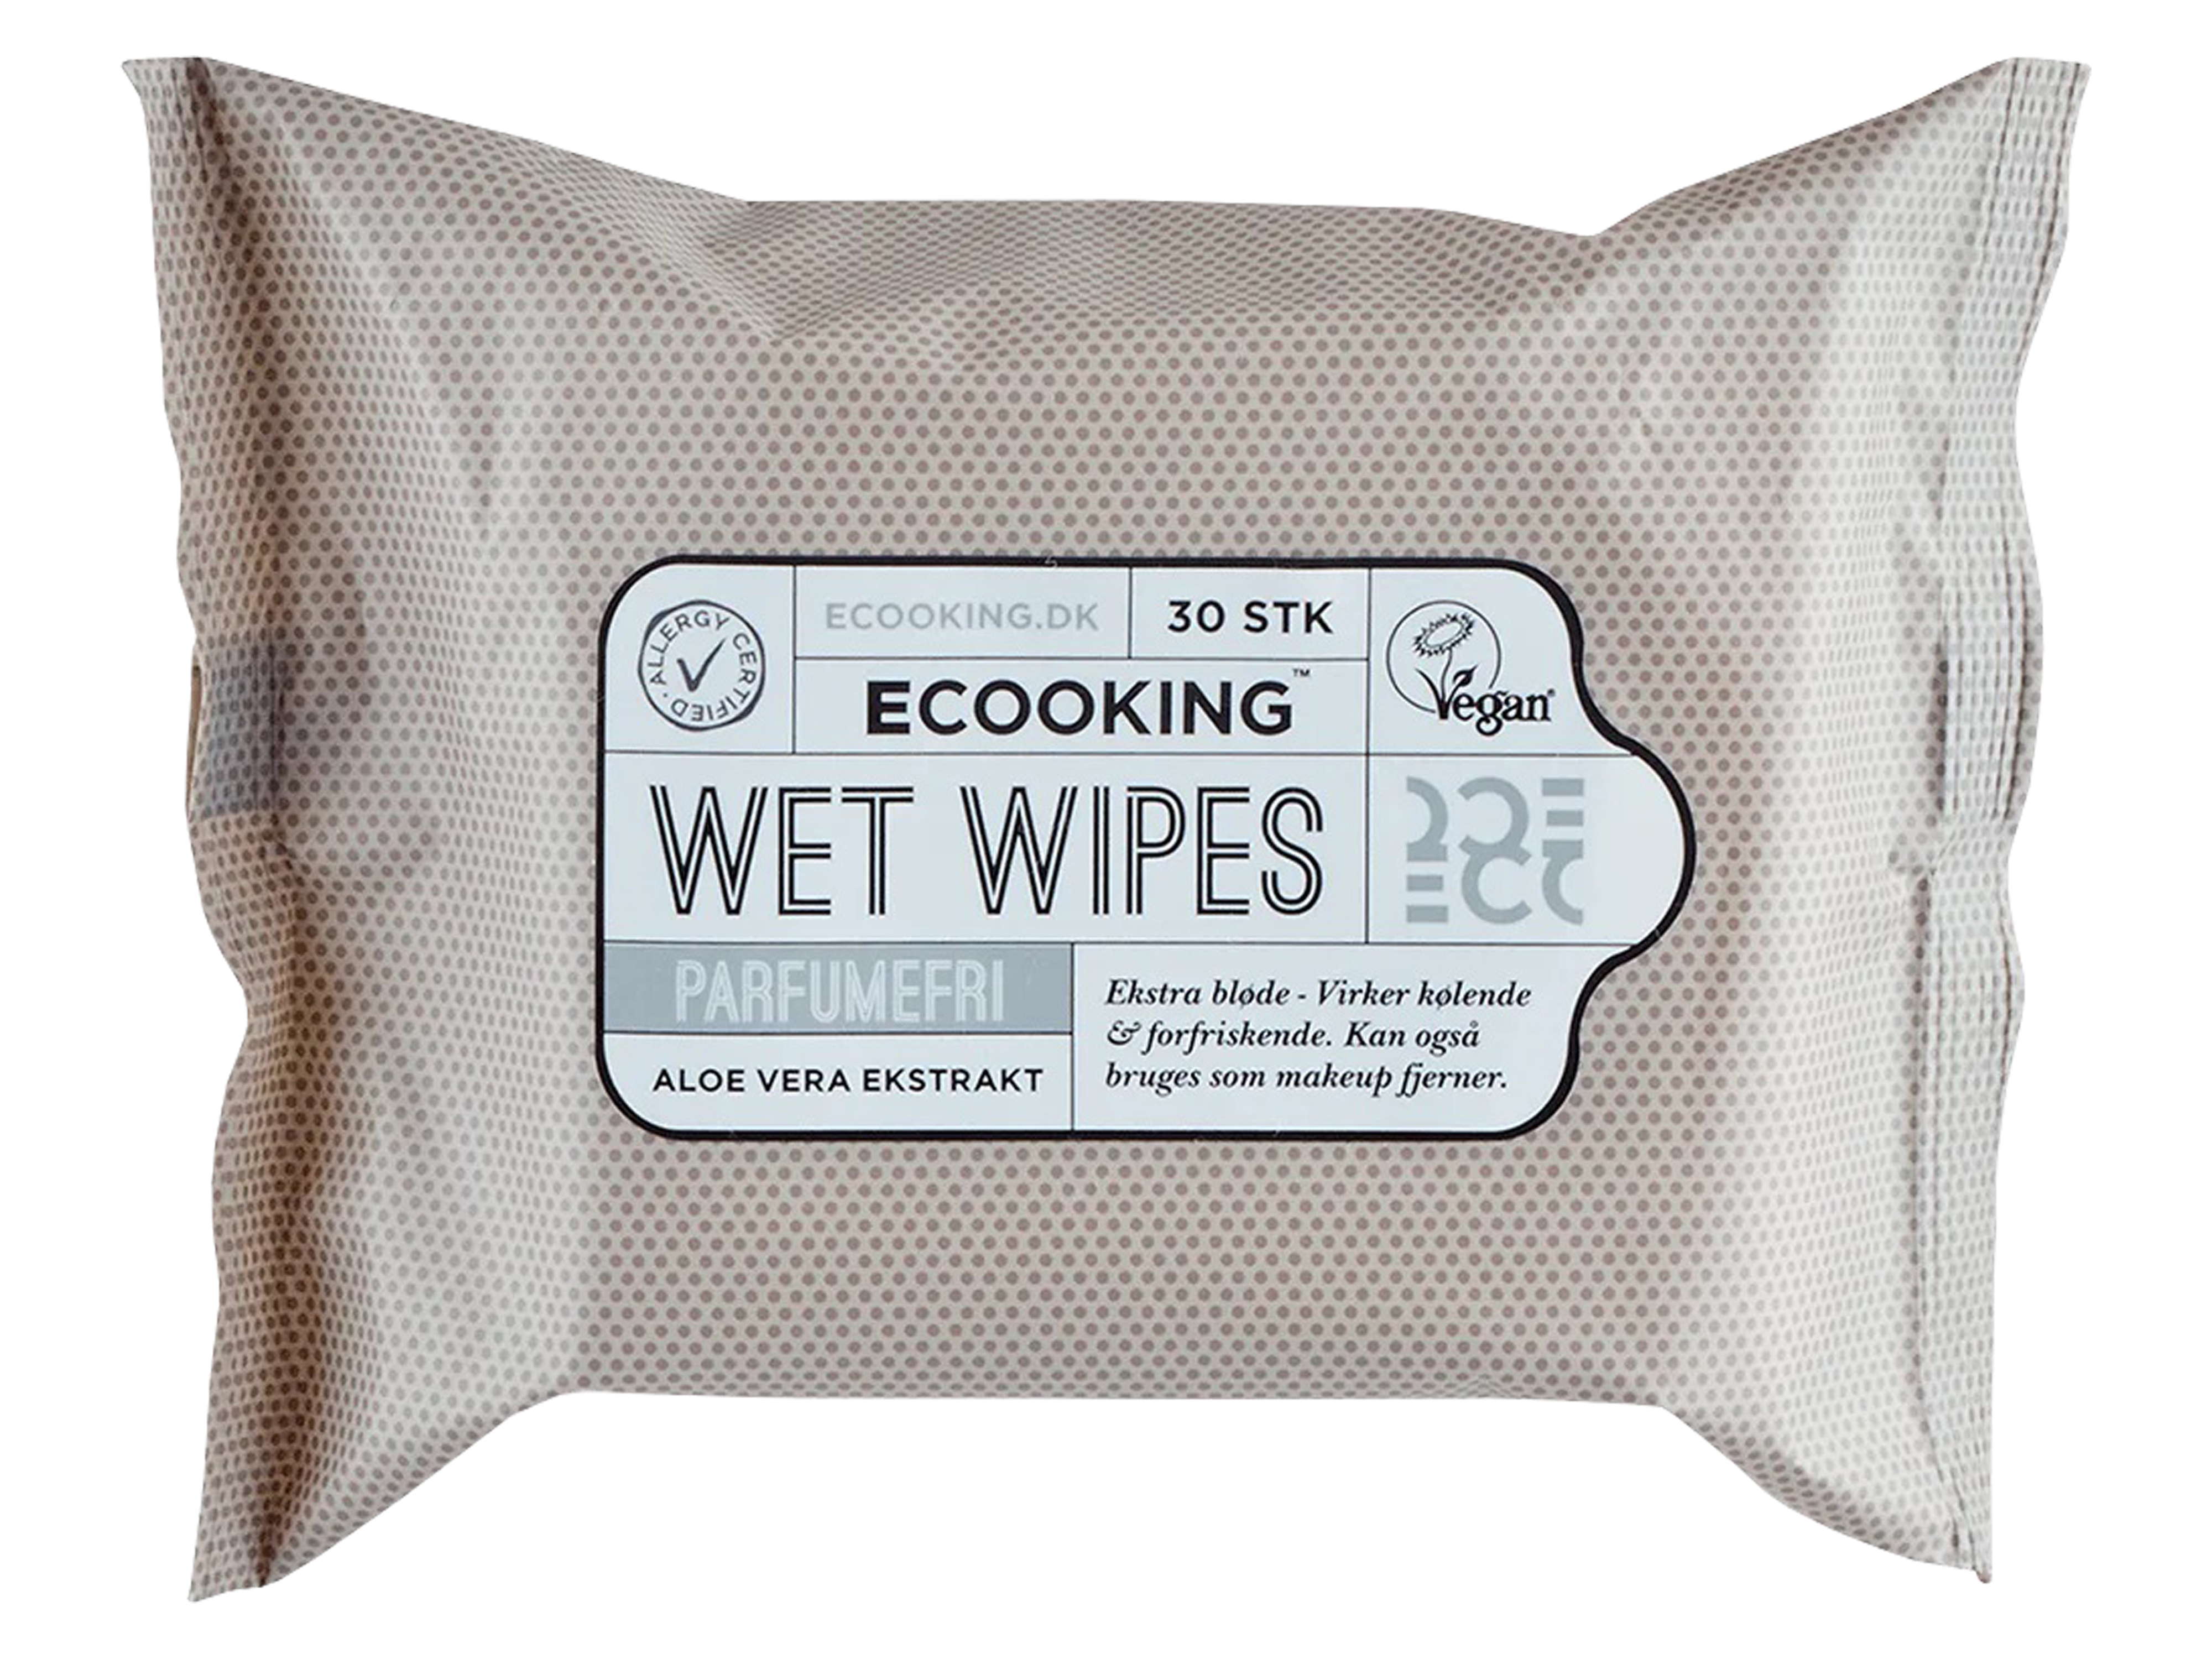 Ecooking Wet Wipes FF, 30 stk.